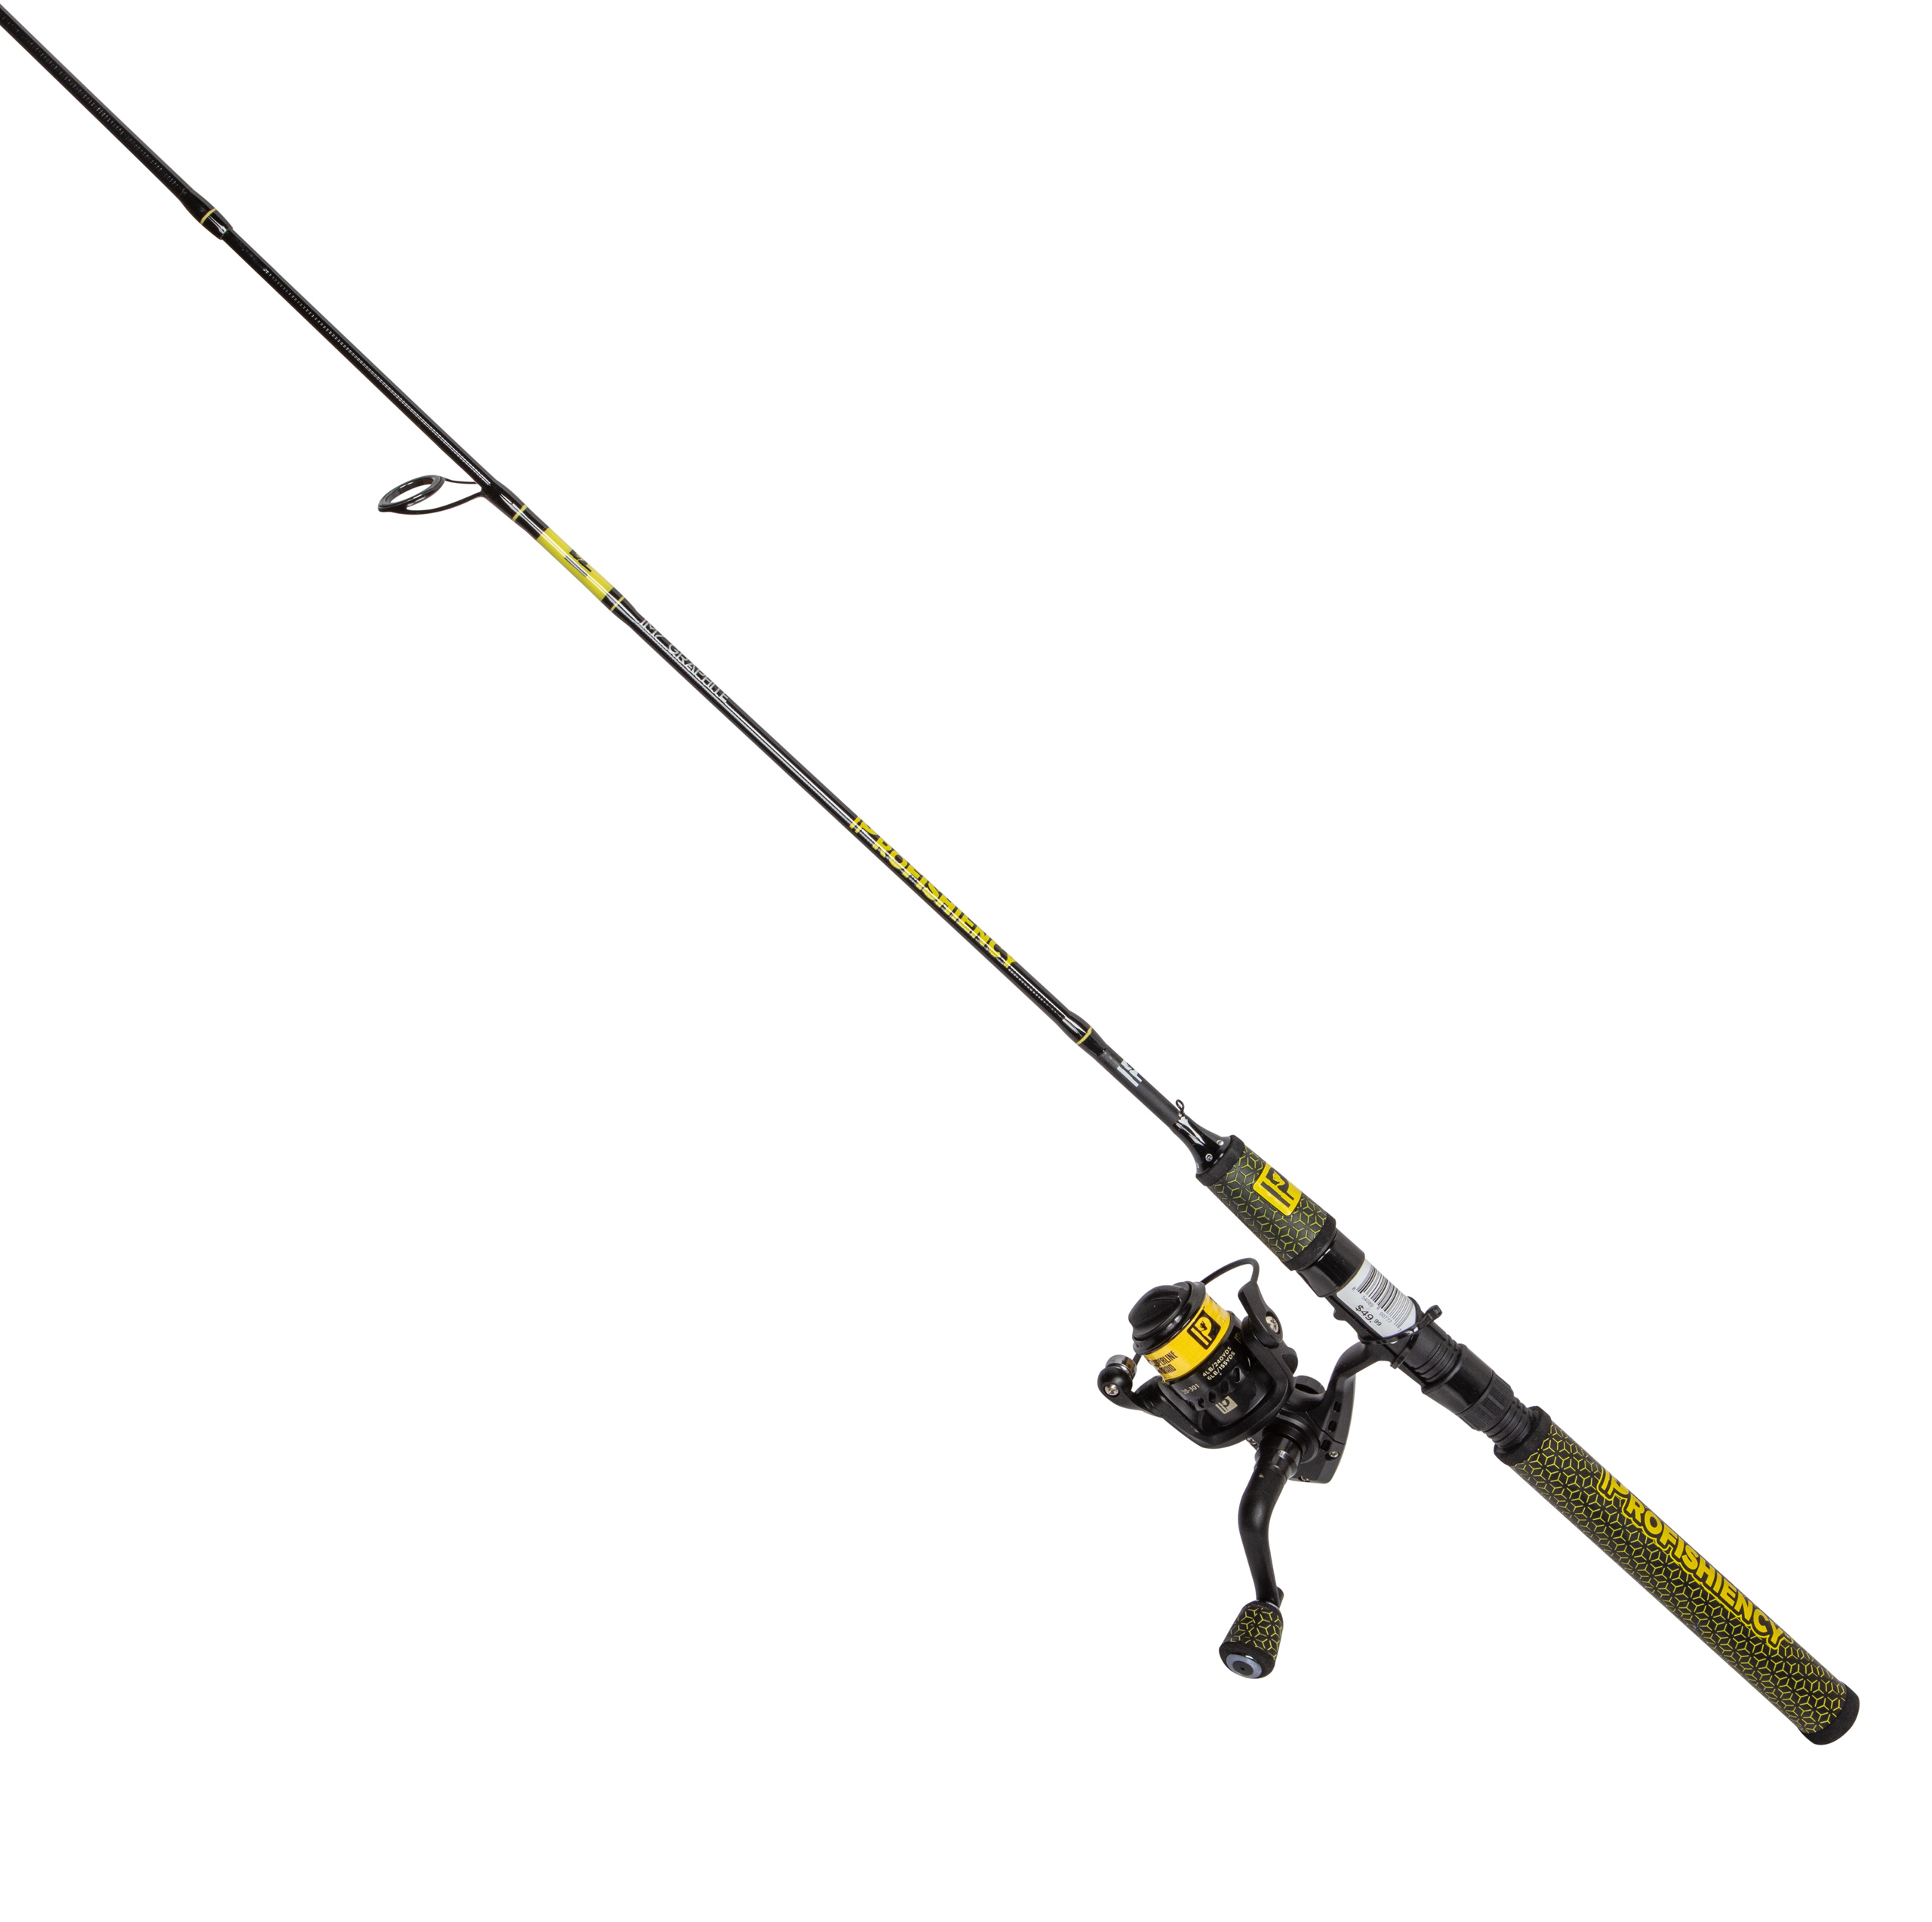 Spinning Fishing Combo 5ft 2 Spinning Rod and 5.2:1 High Speed Spin